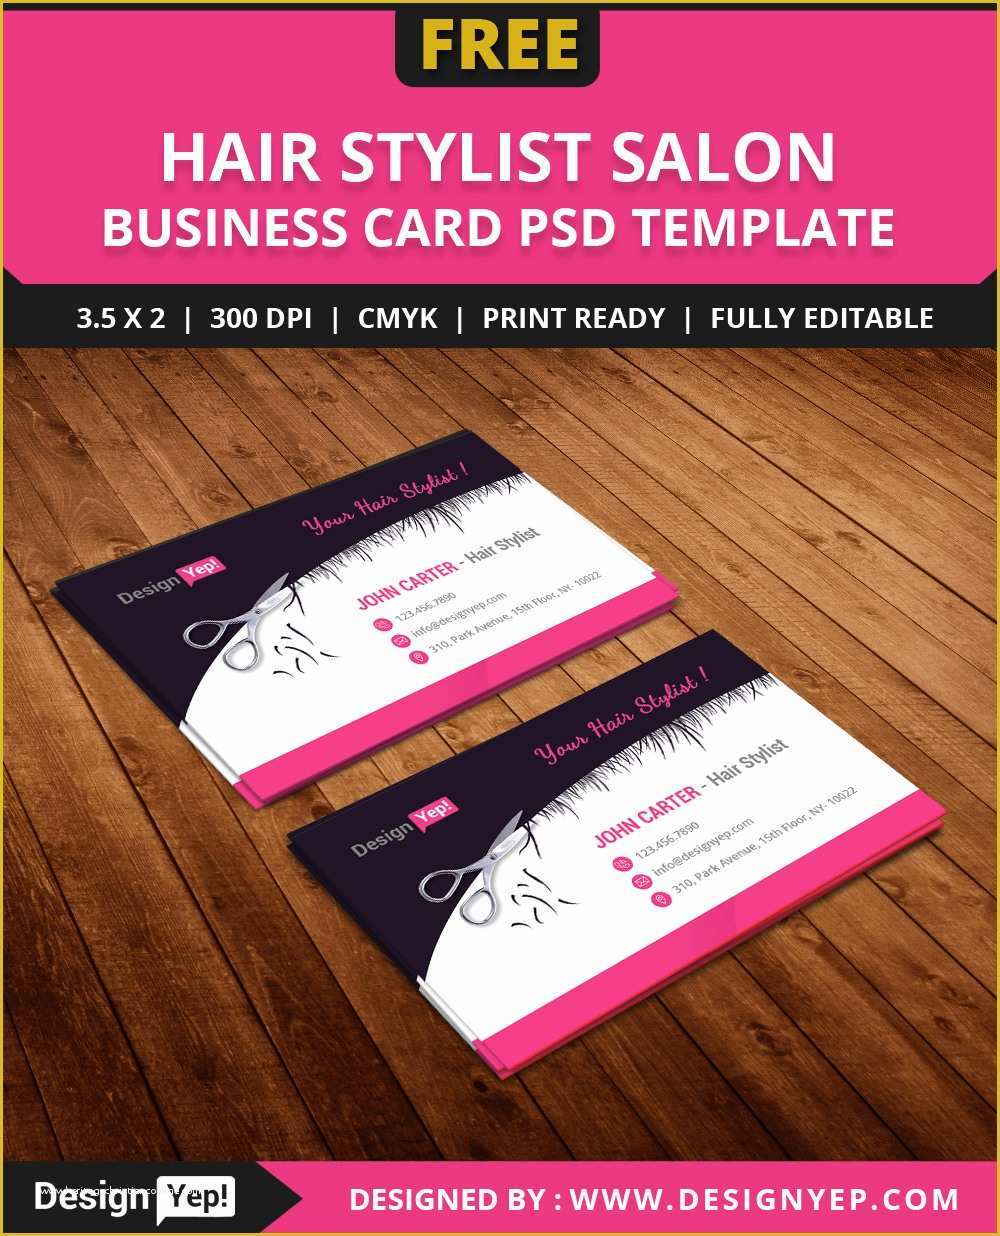 Business Calling Card Template Free Of Free Hair Stylist Salon Business Card Template Psd Designyep